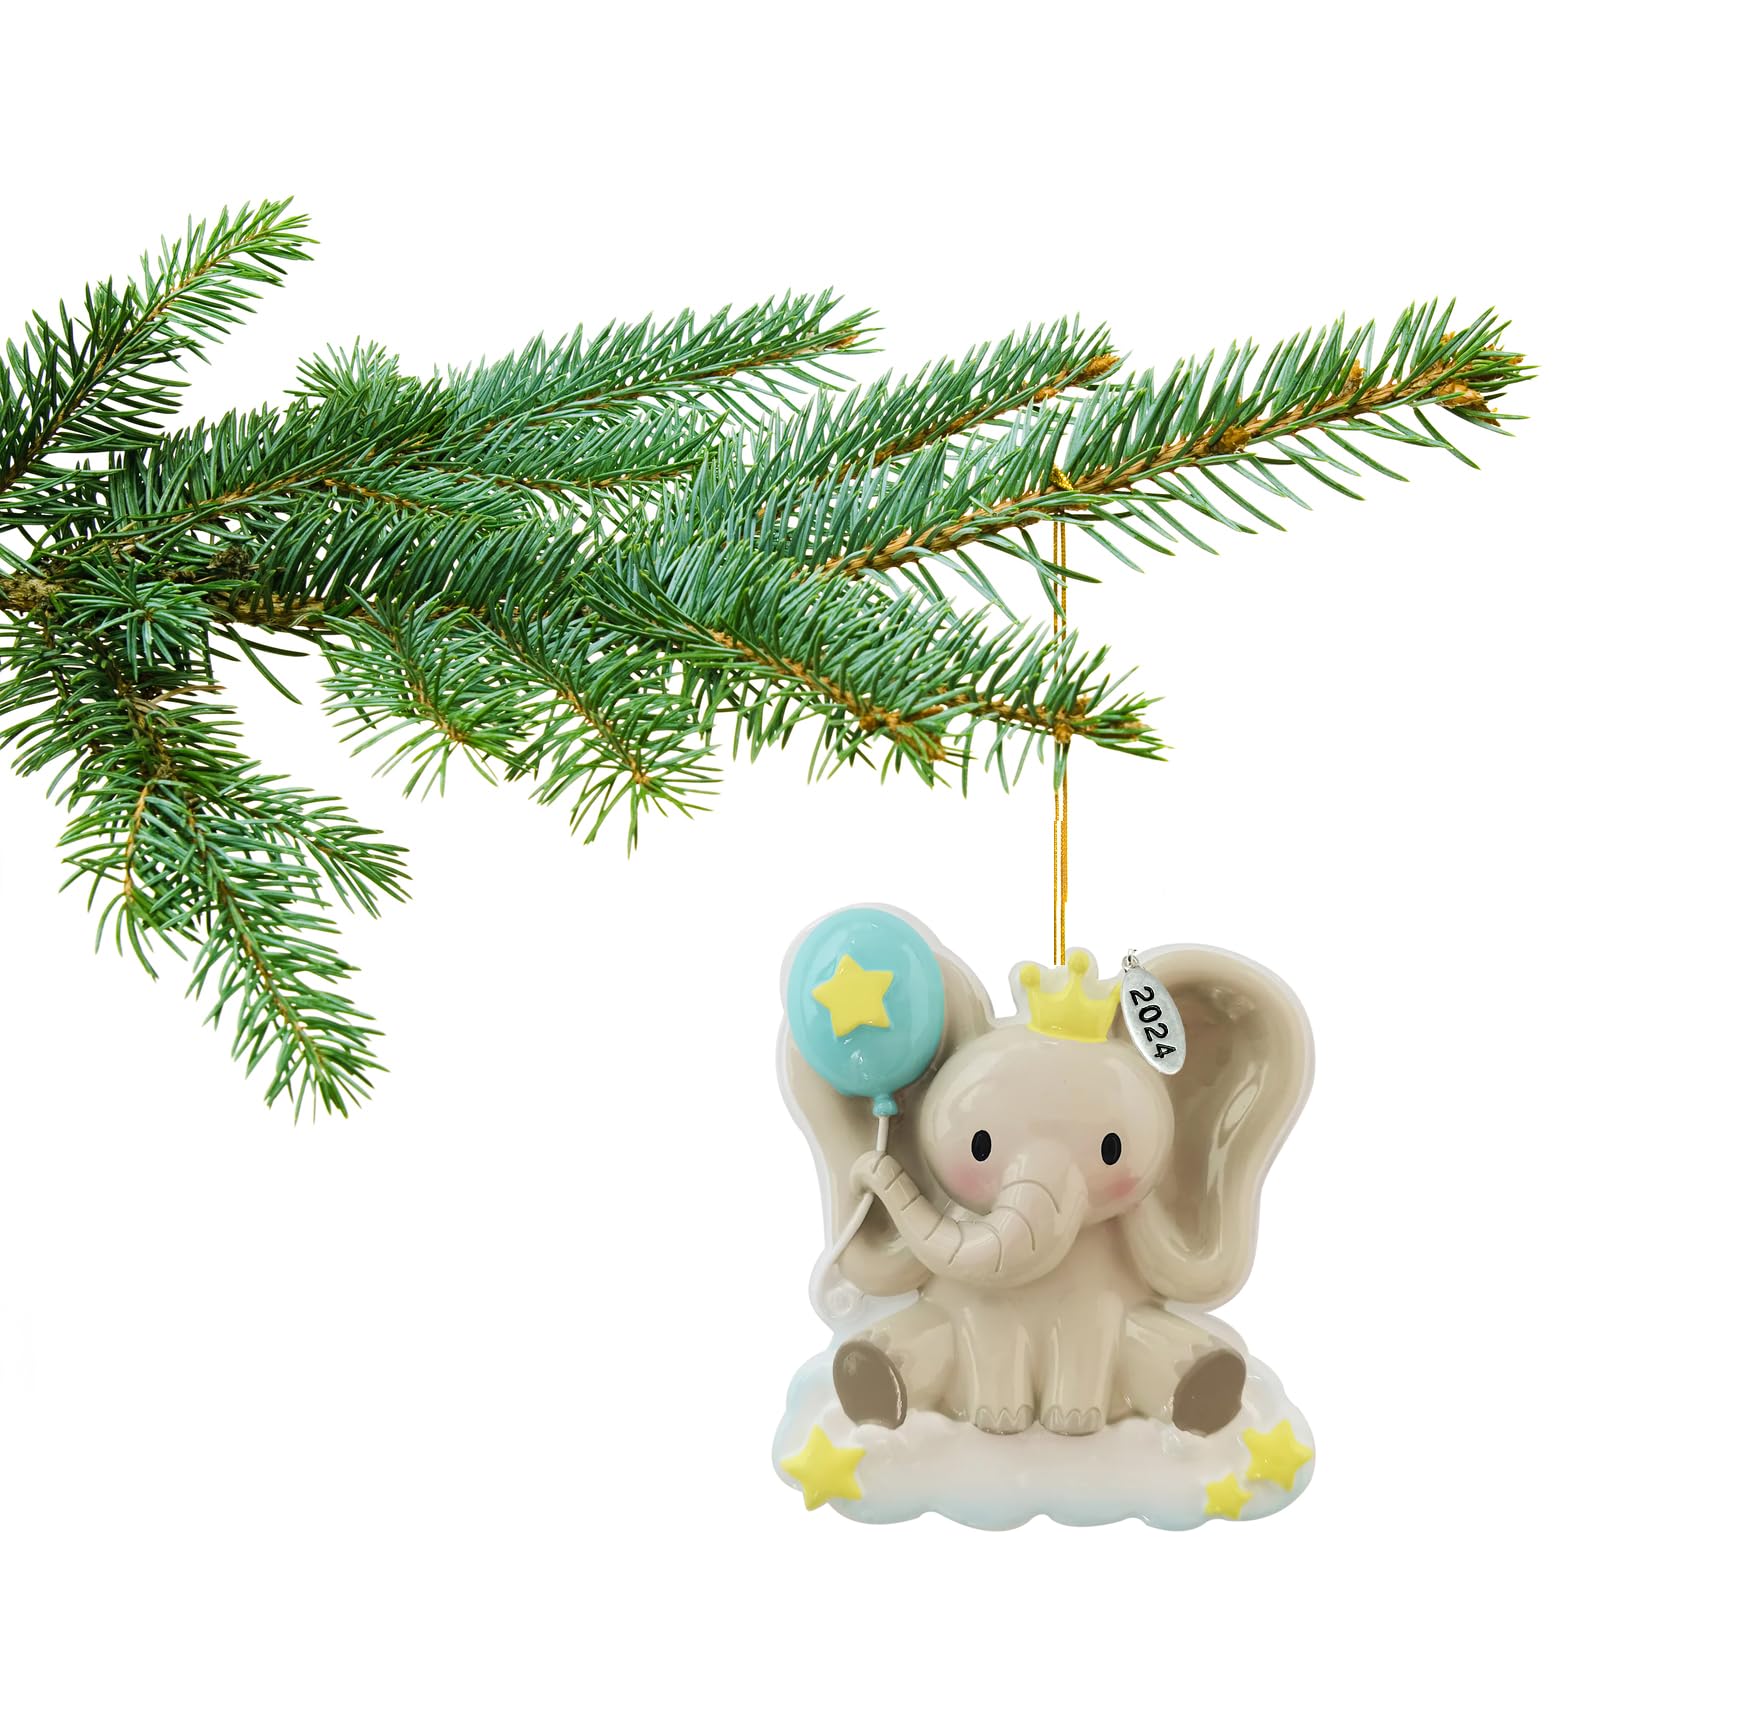 2024 Baby Christmas Ornament, Elephant Baby Boy Christmas Ornament or Happy Birthday Ornament - Can Be Personalized at Home, Comes in a Gift Box So It's Ready for Giving